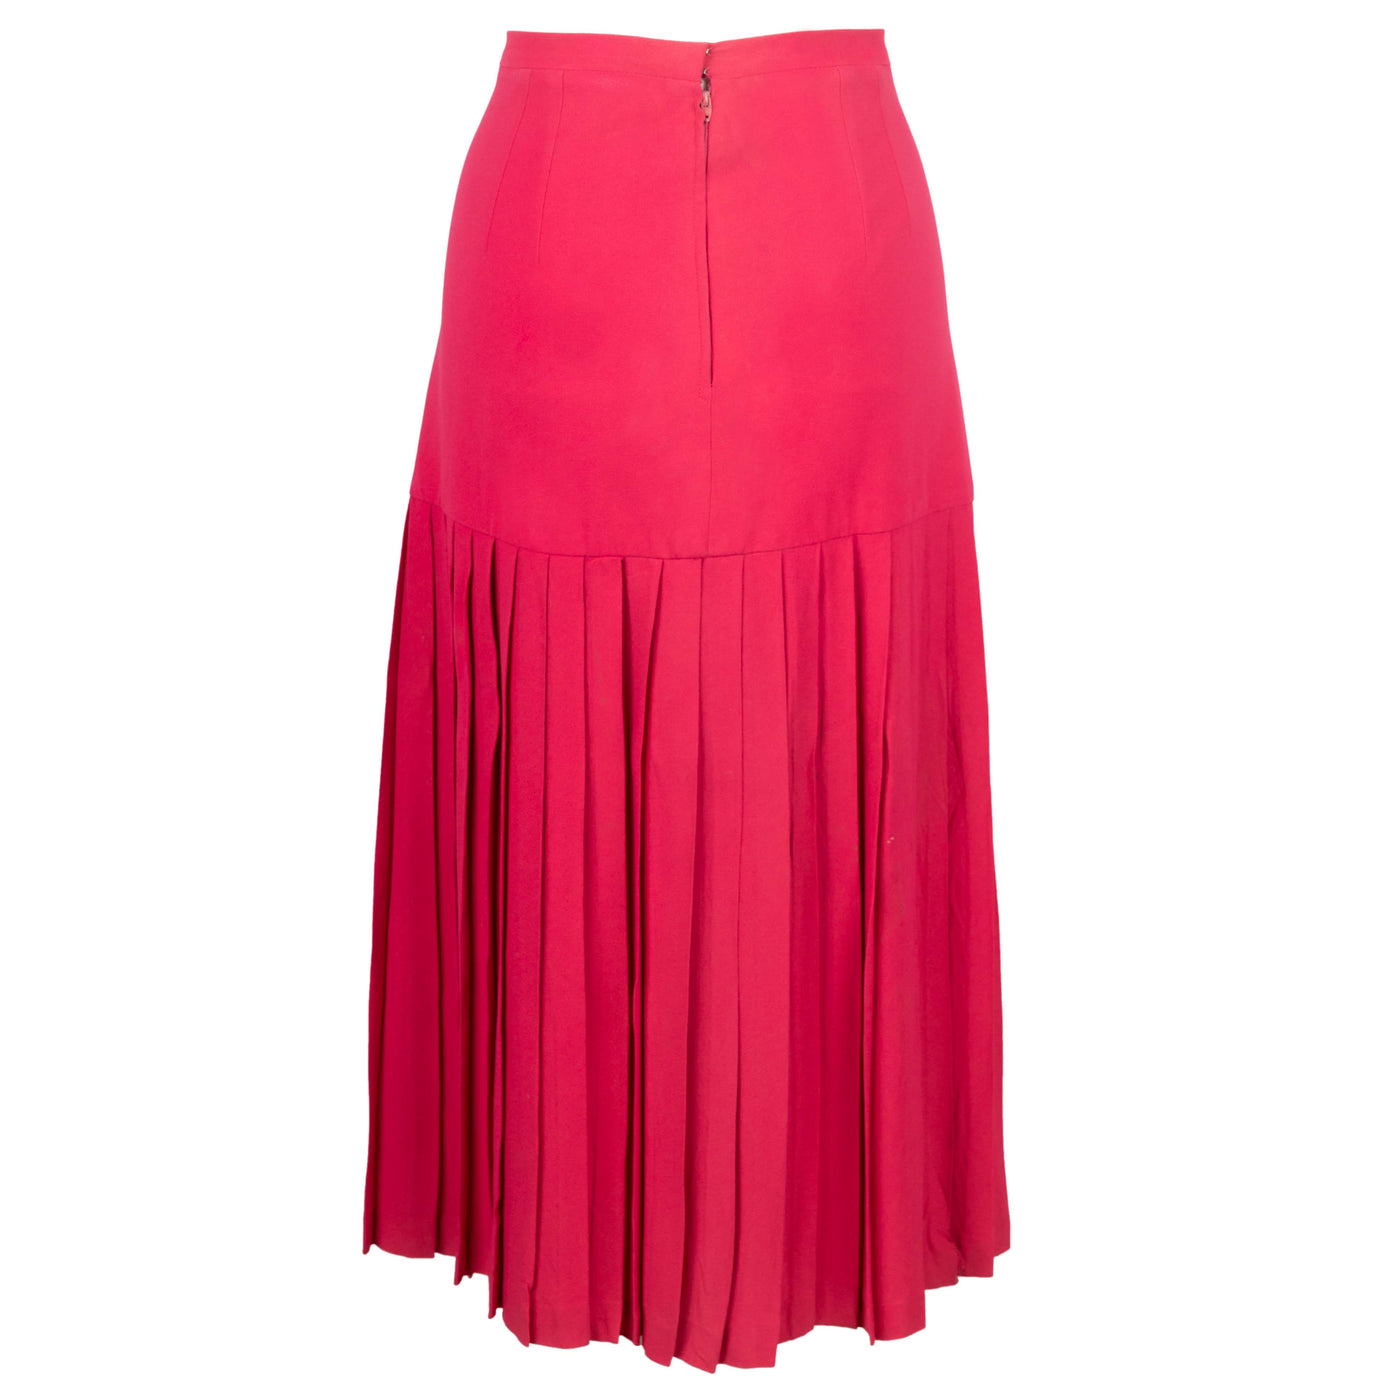 Secondhand Valentino Pink Pleated Skirt